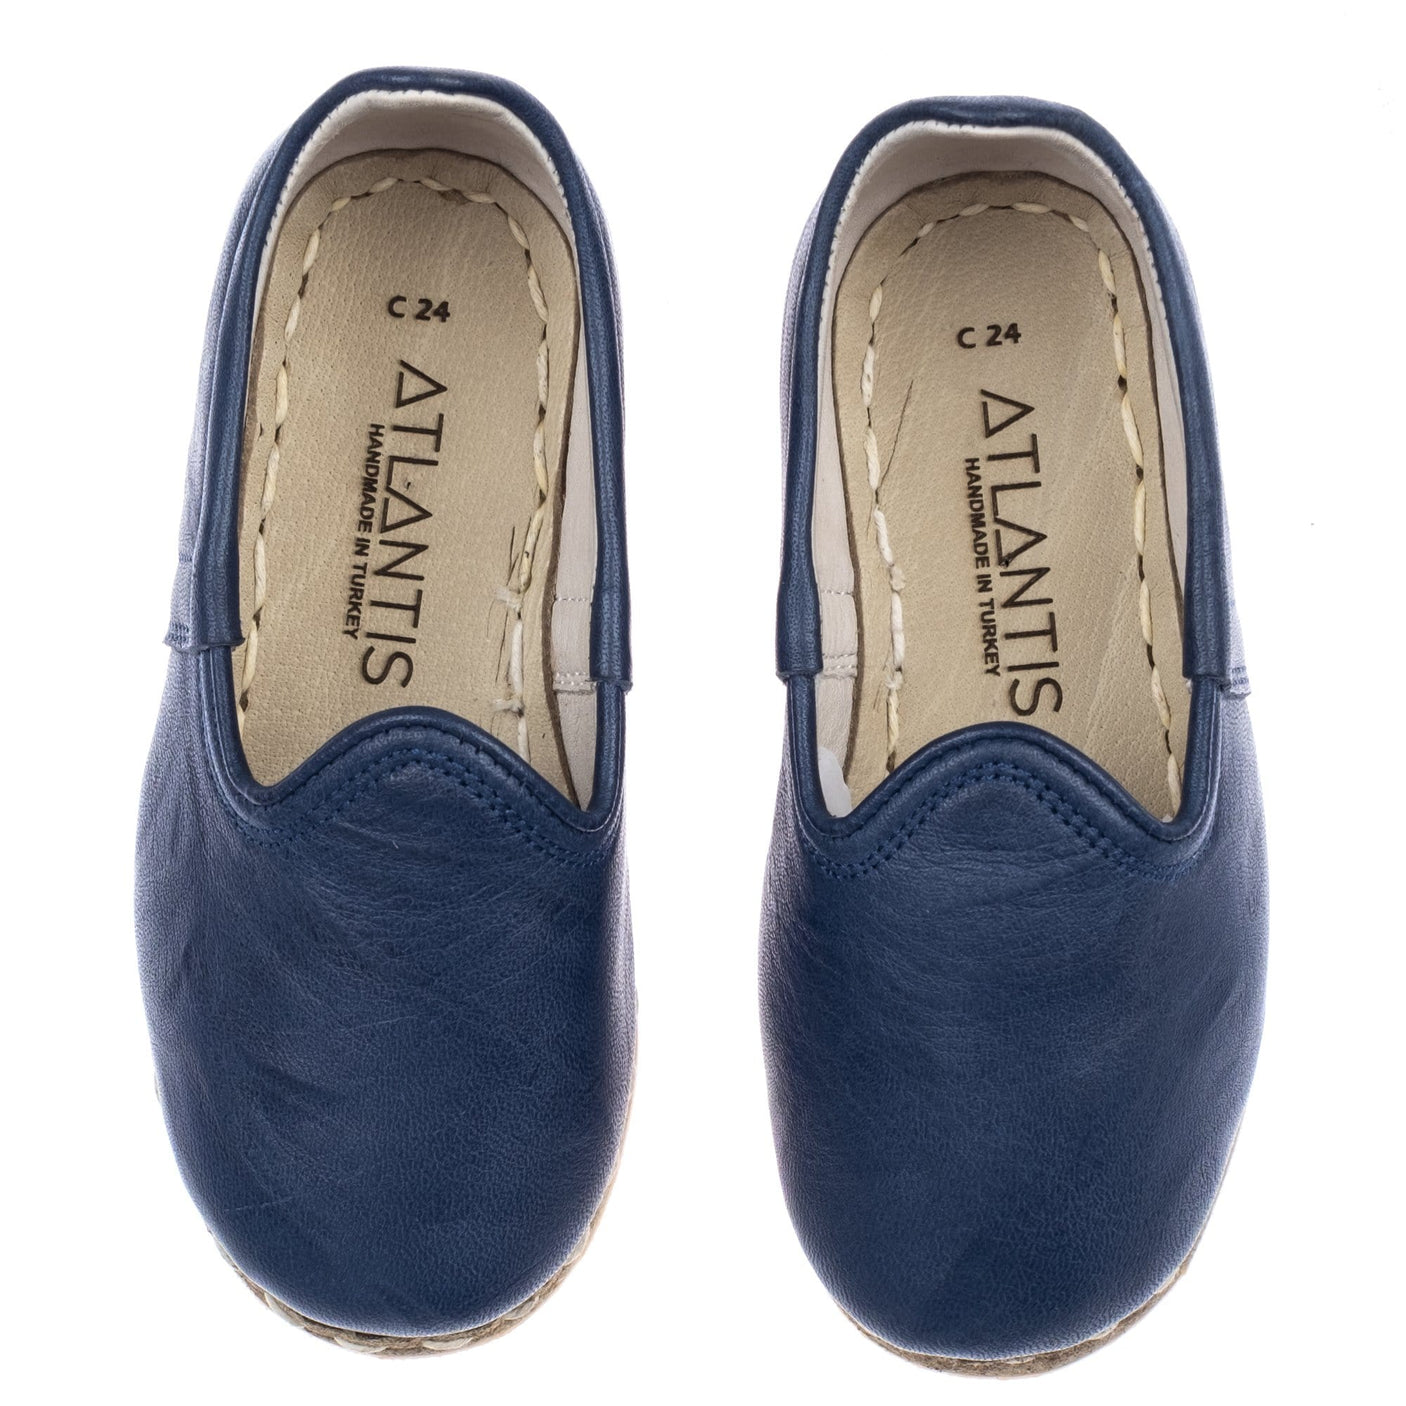 Kids Navy Leather Shoes